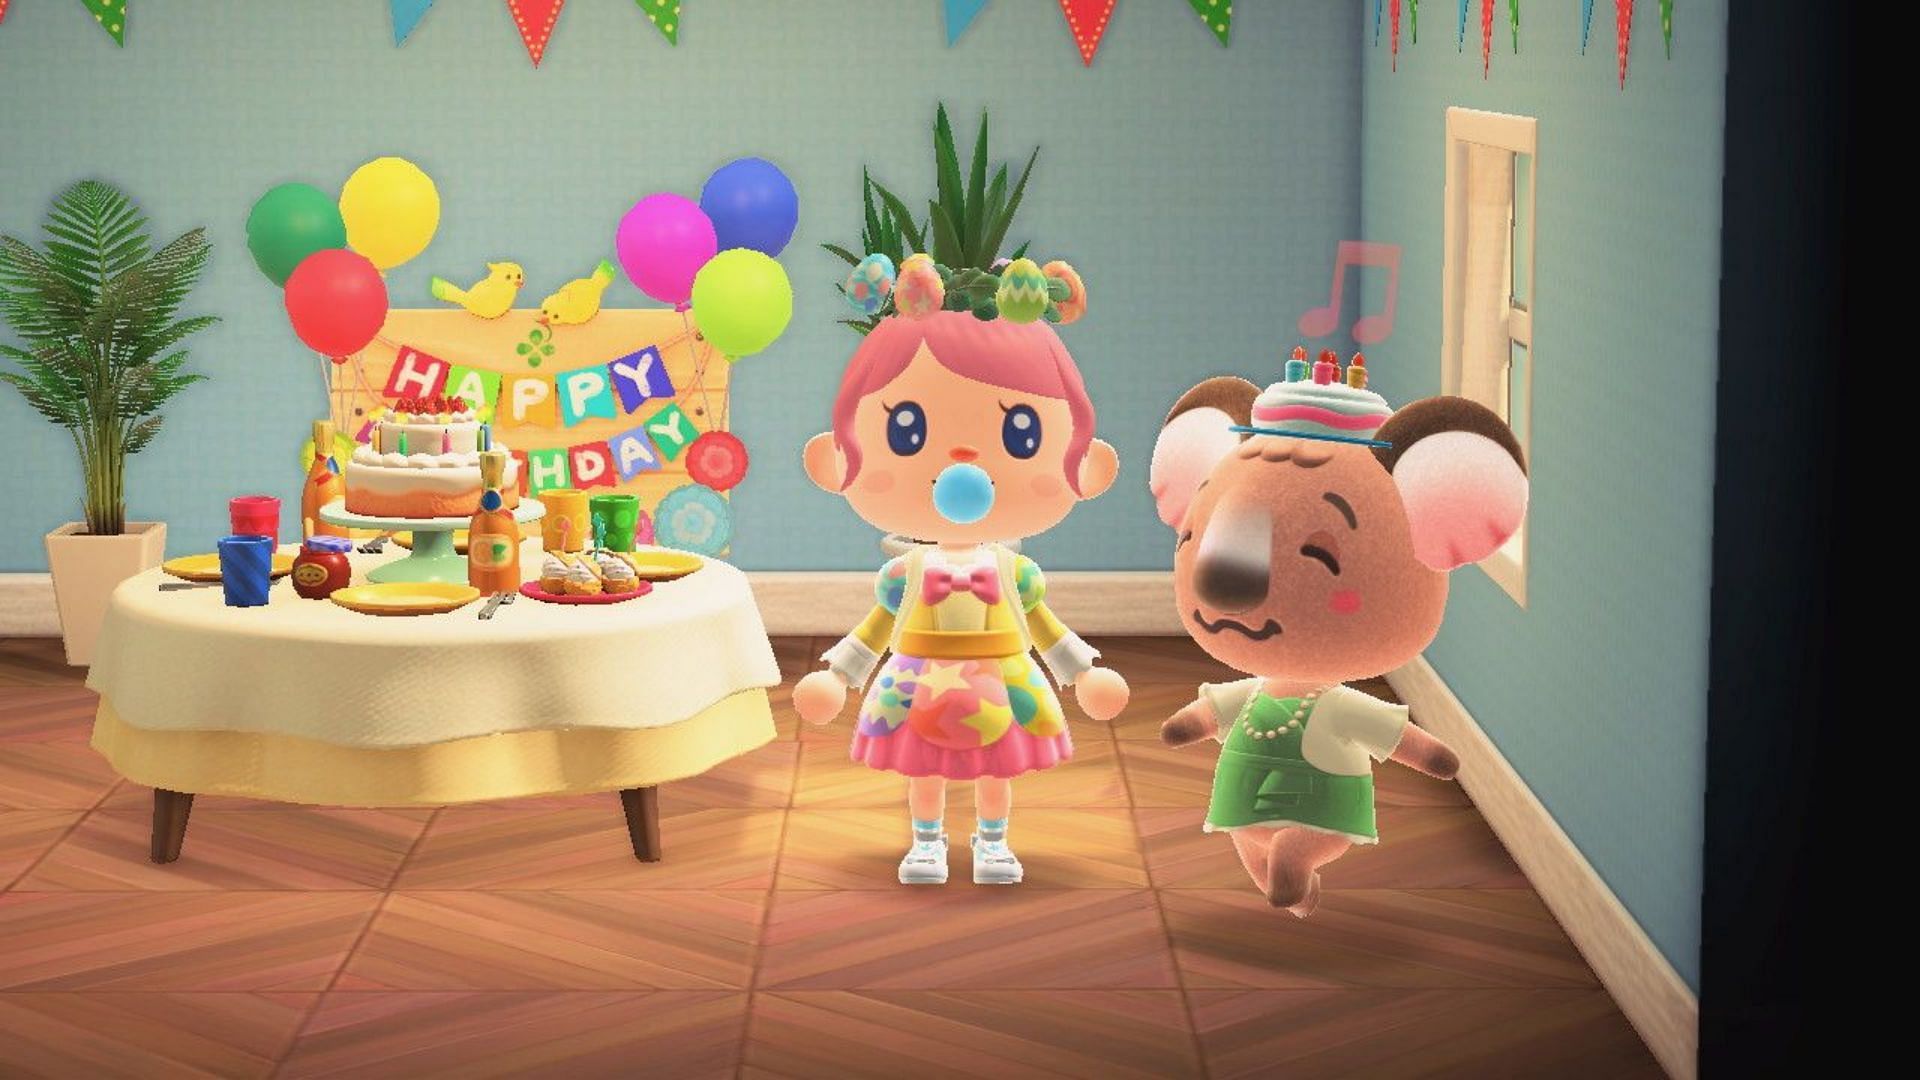 Which Animal Crossing: New Horizons character has your birthday?